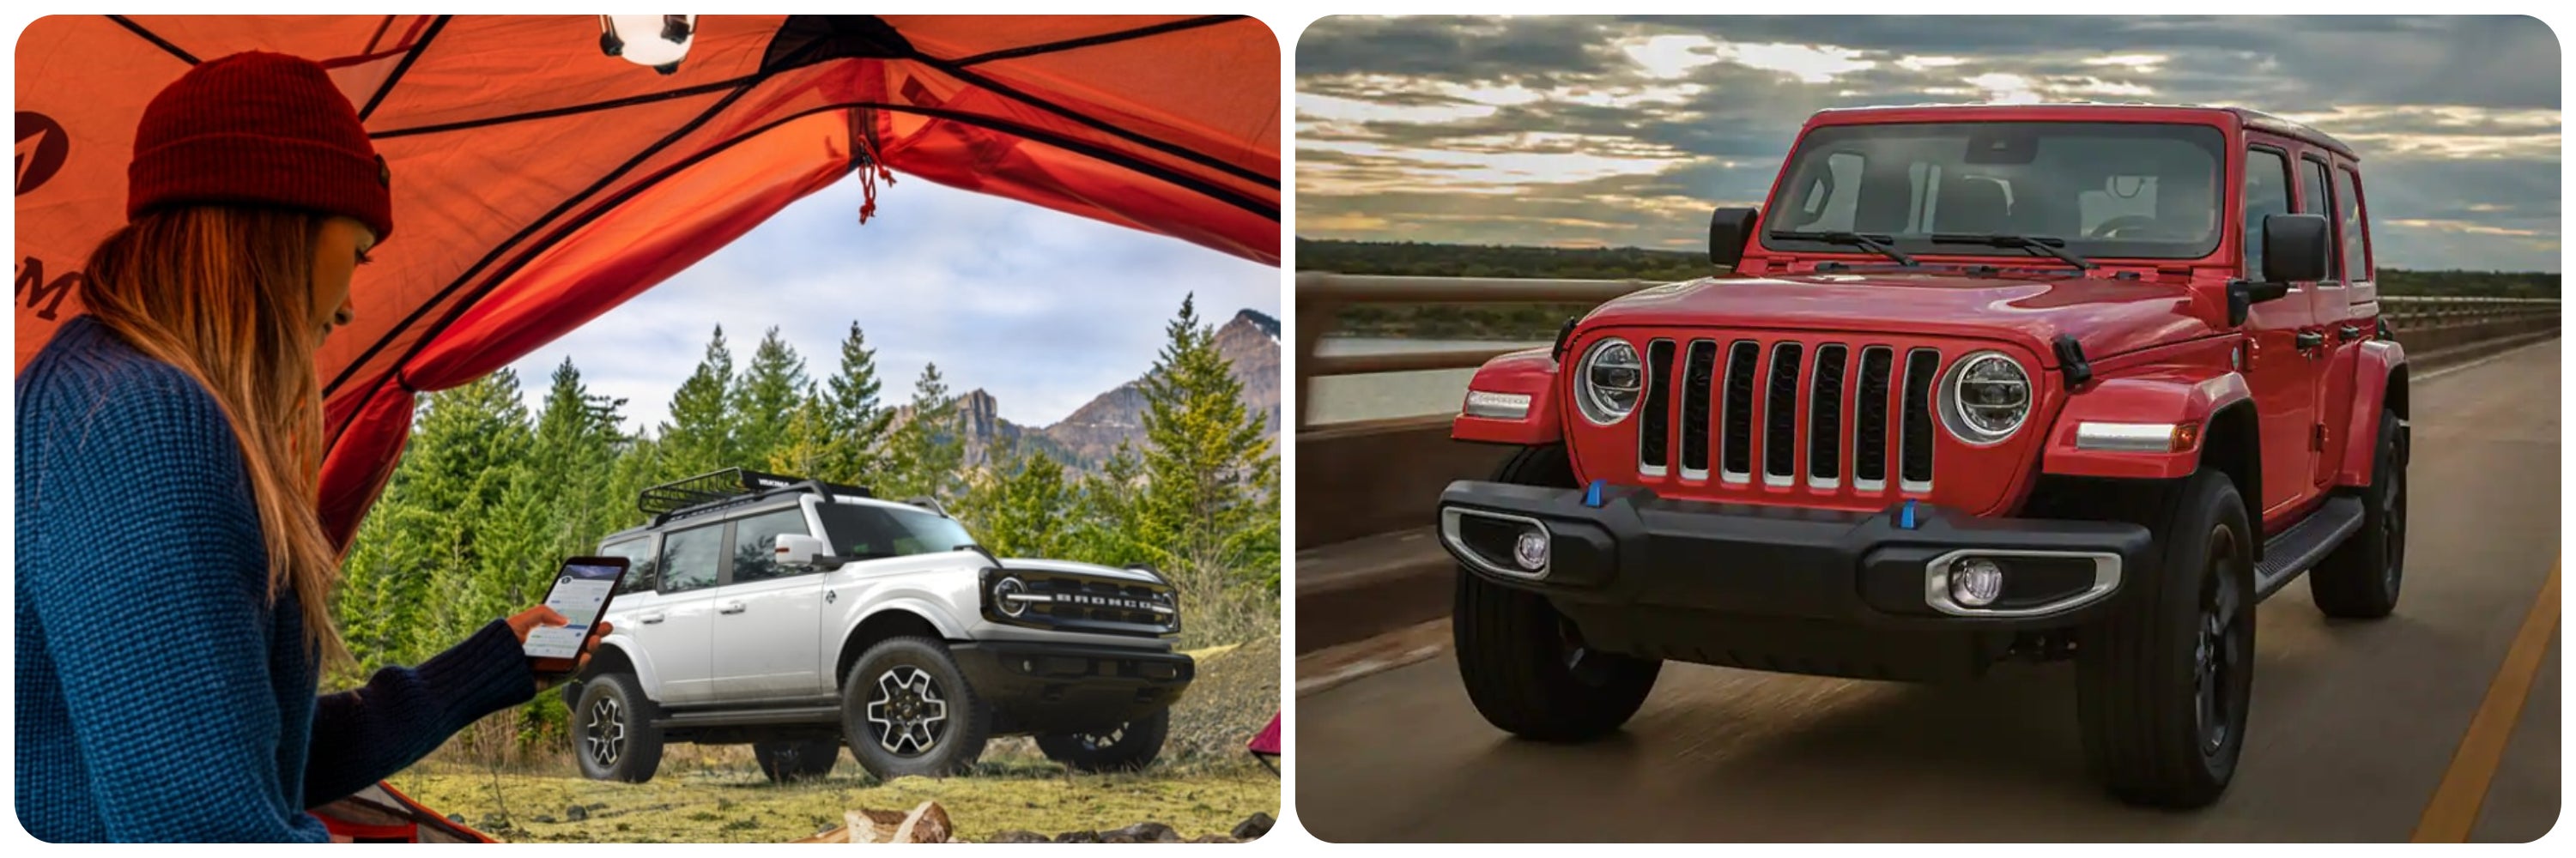 On the left a view out of an orange tent reveals a white 2023 Ford Bronco, on the right a red 2023 Jeep Wrangler drives down a country road